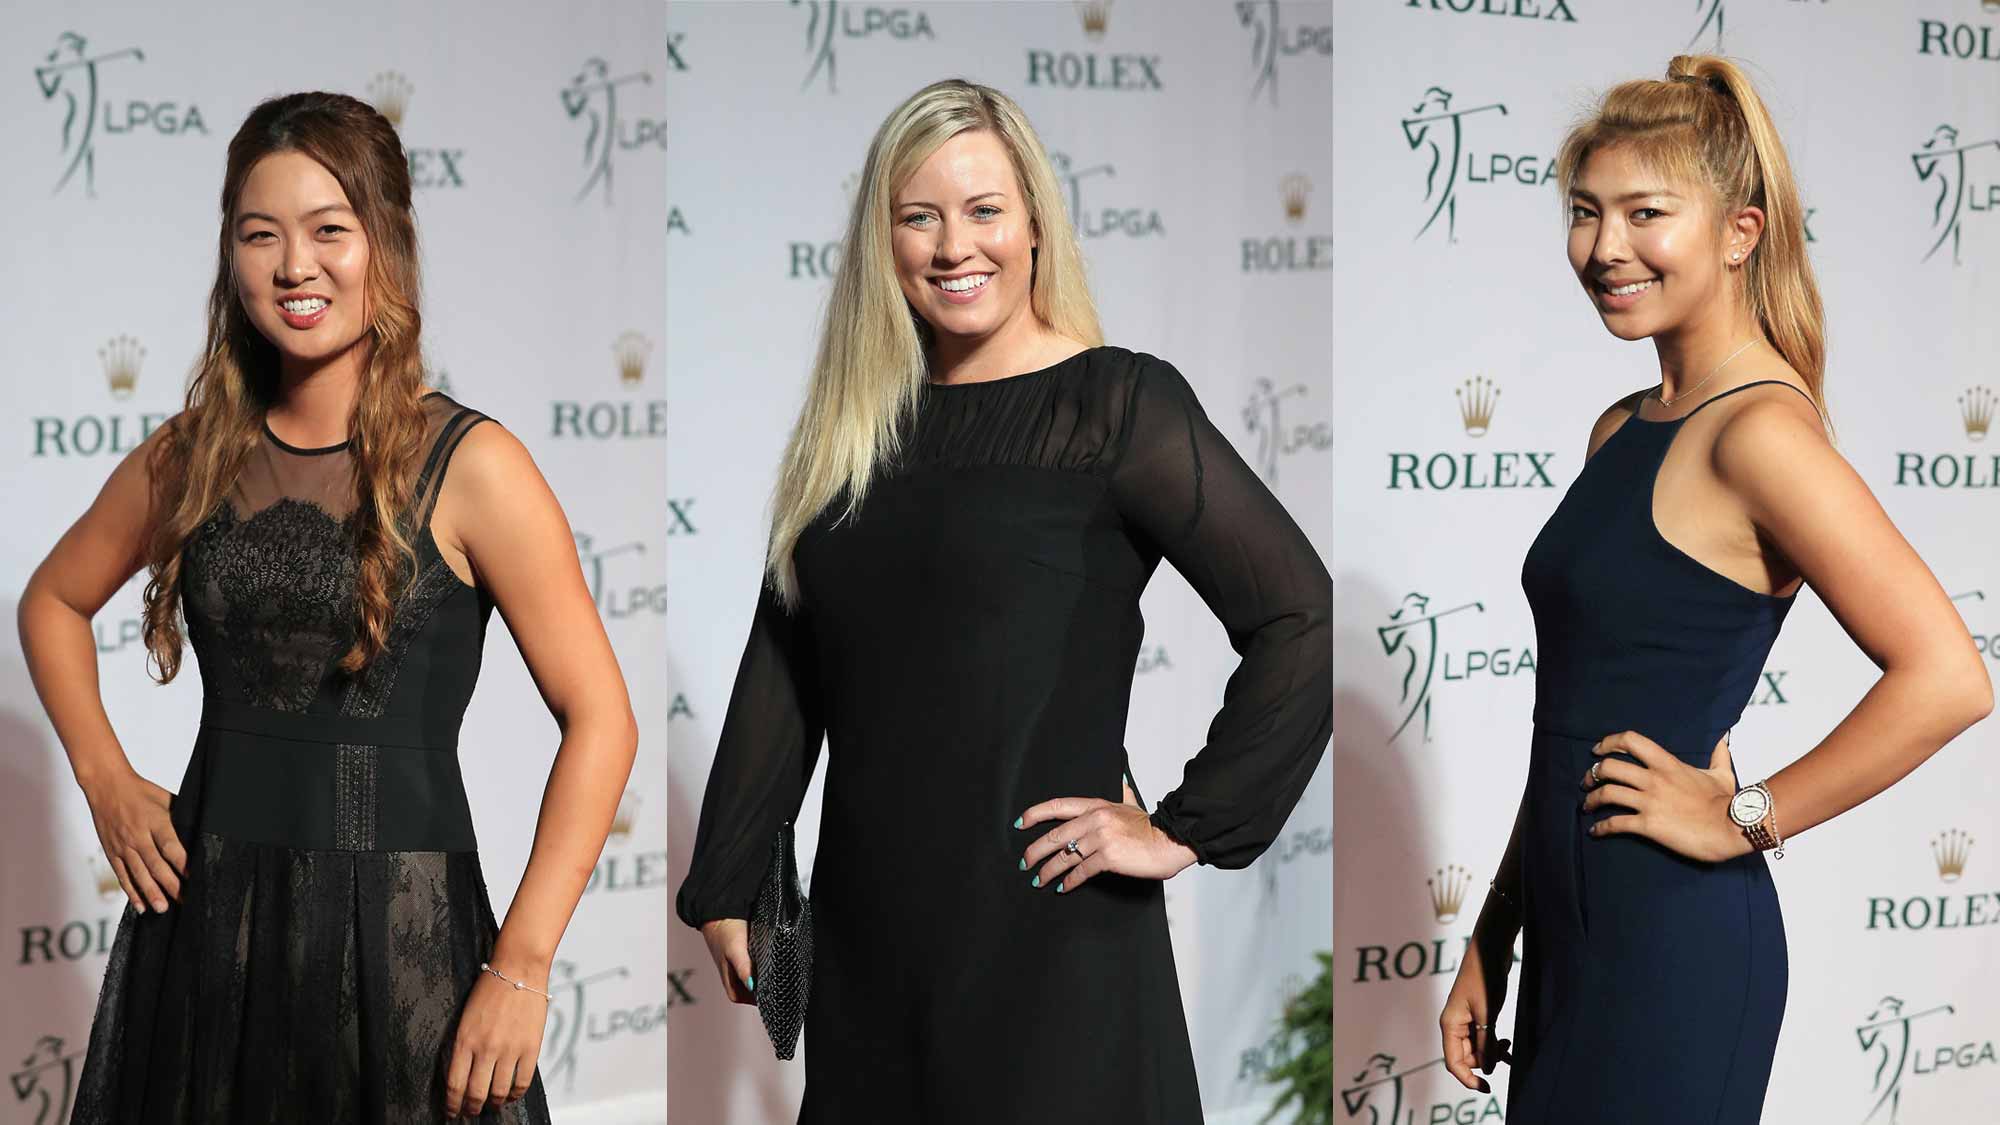 2015 Rolex Players Awards and Red Carpet Photo Gallery LPGA Ladies